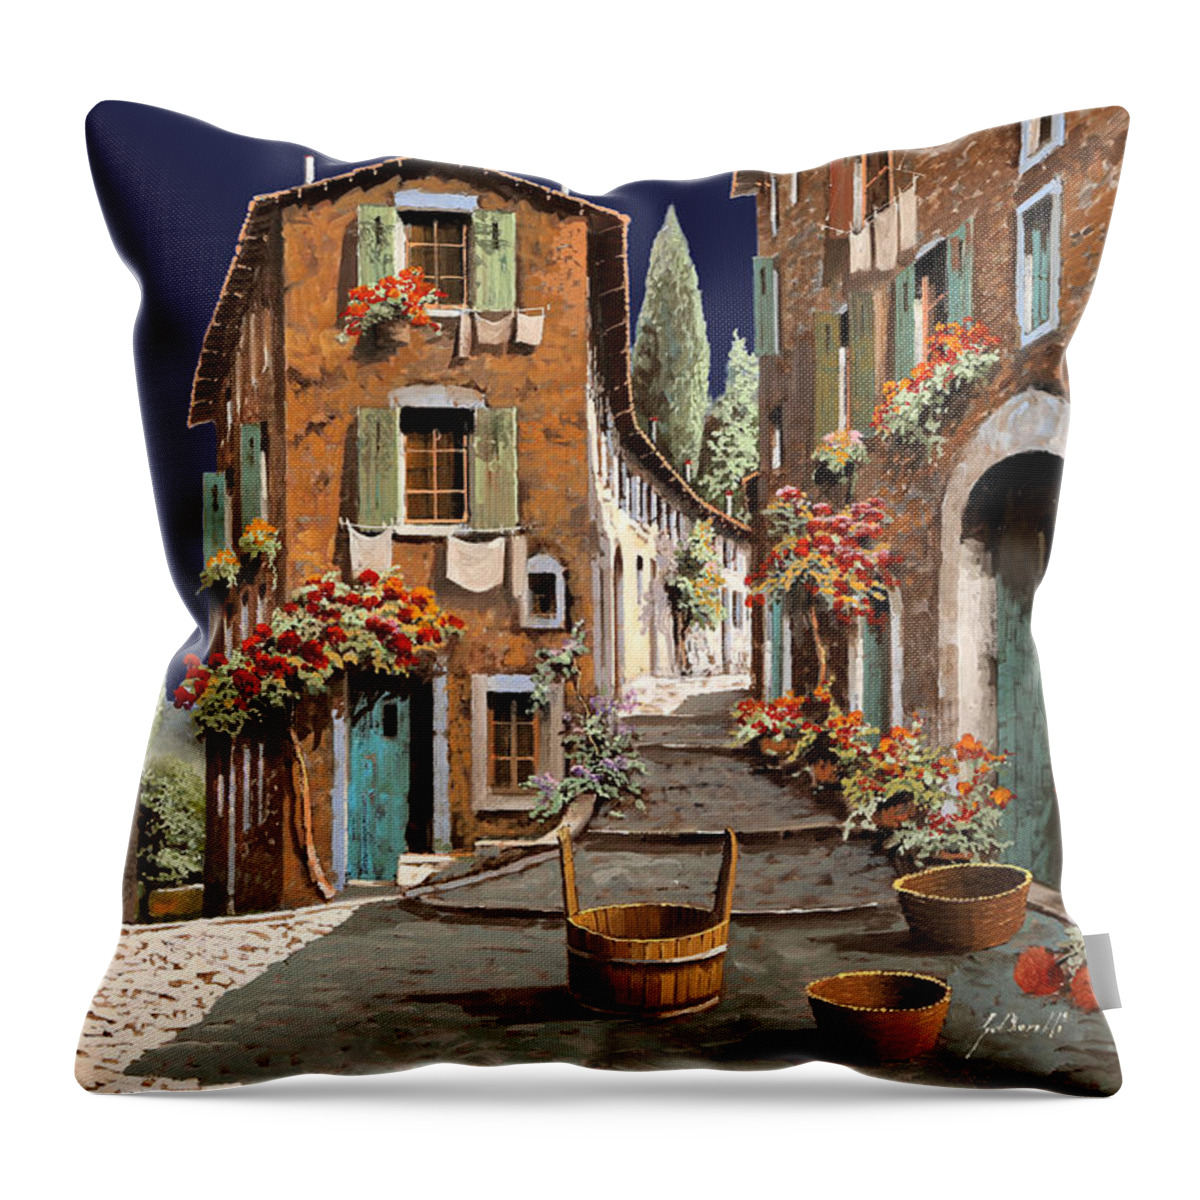 Street Throw Pillow featuring the painting Percorso Nel Paese Al Mattino by Guido Borelli